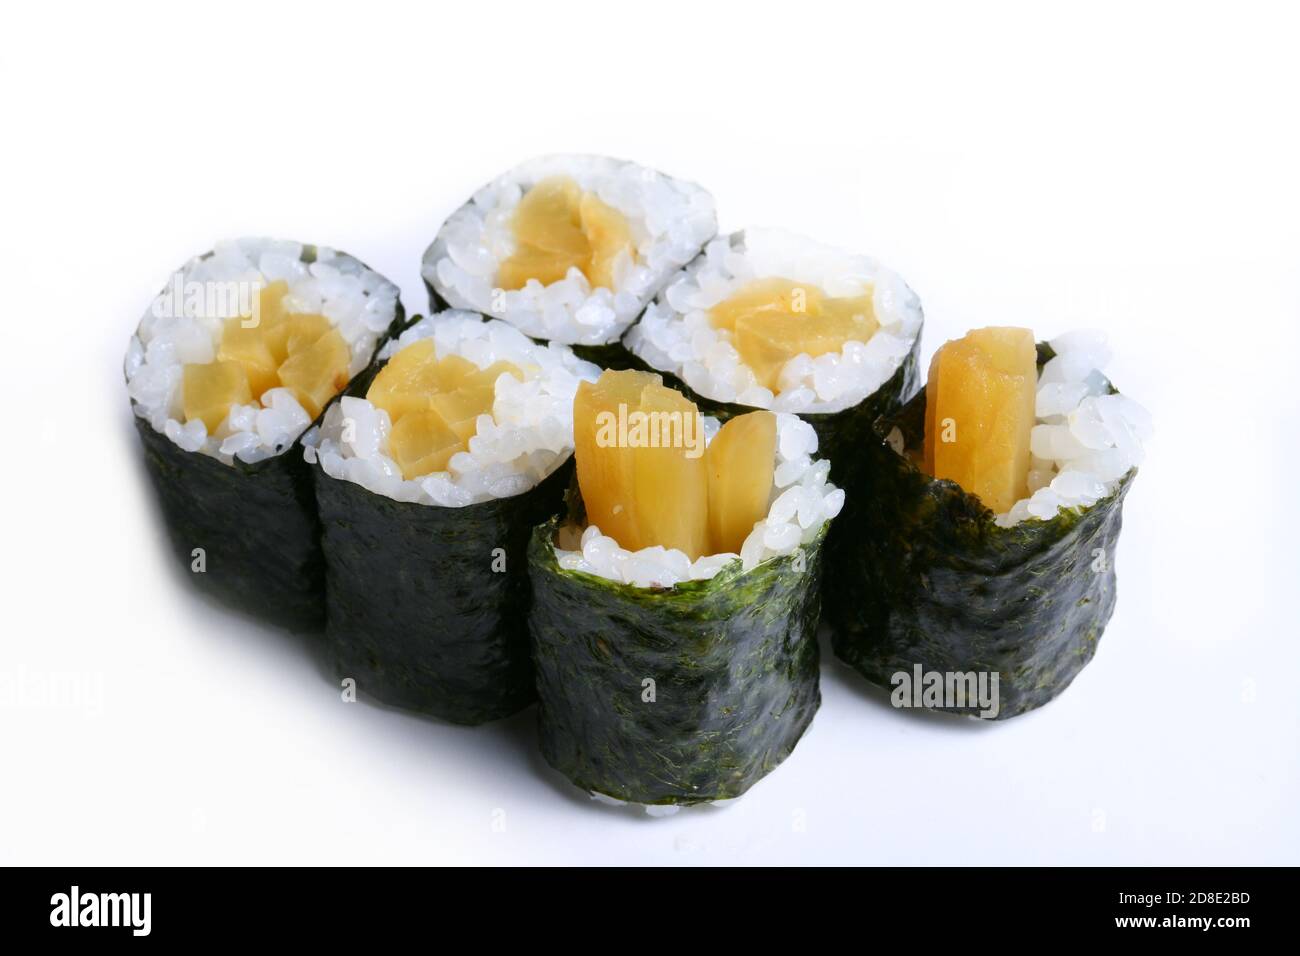 Kappa Maki, Maki sushi rolls, pickled cucumber rolled with sushi rice wrapped by dried seaweed food style Photo